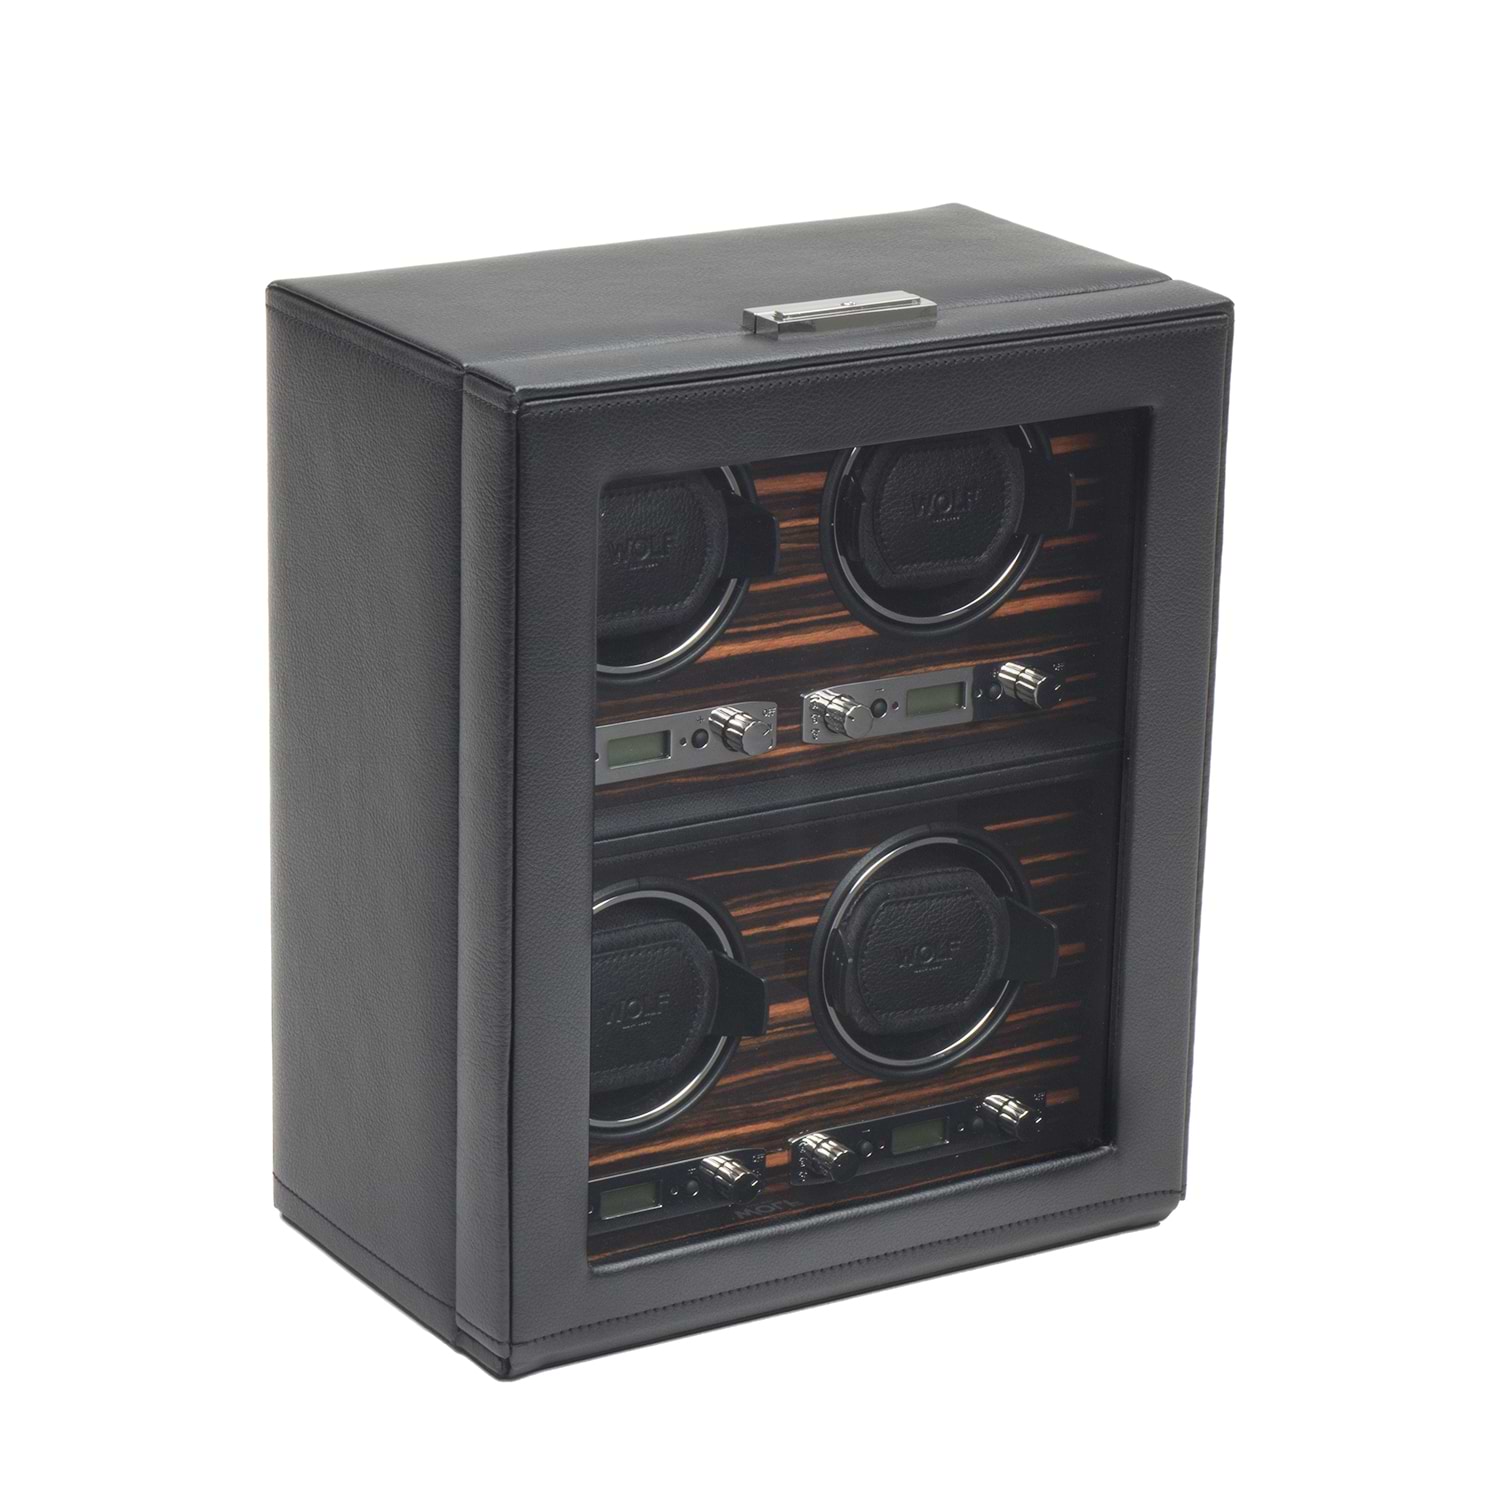 WOLF Roadster Men's 4 Watch Winder in Faux Leather w/ Glass Cover & Key Lock Closure